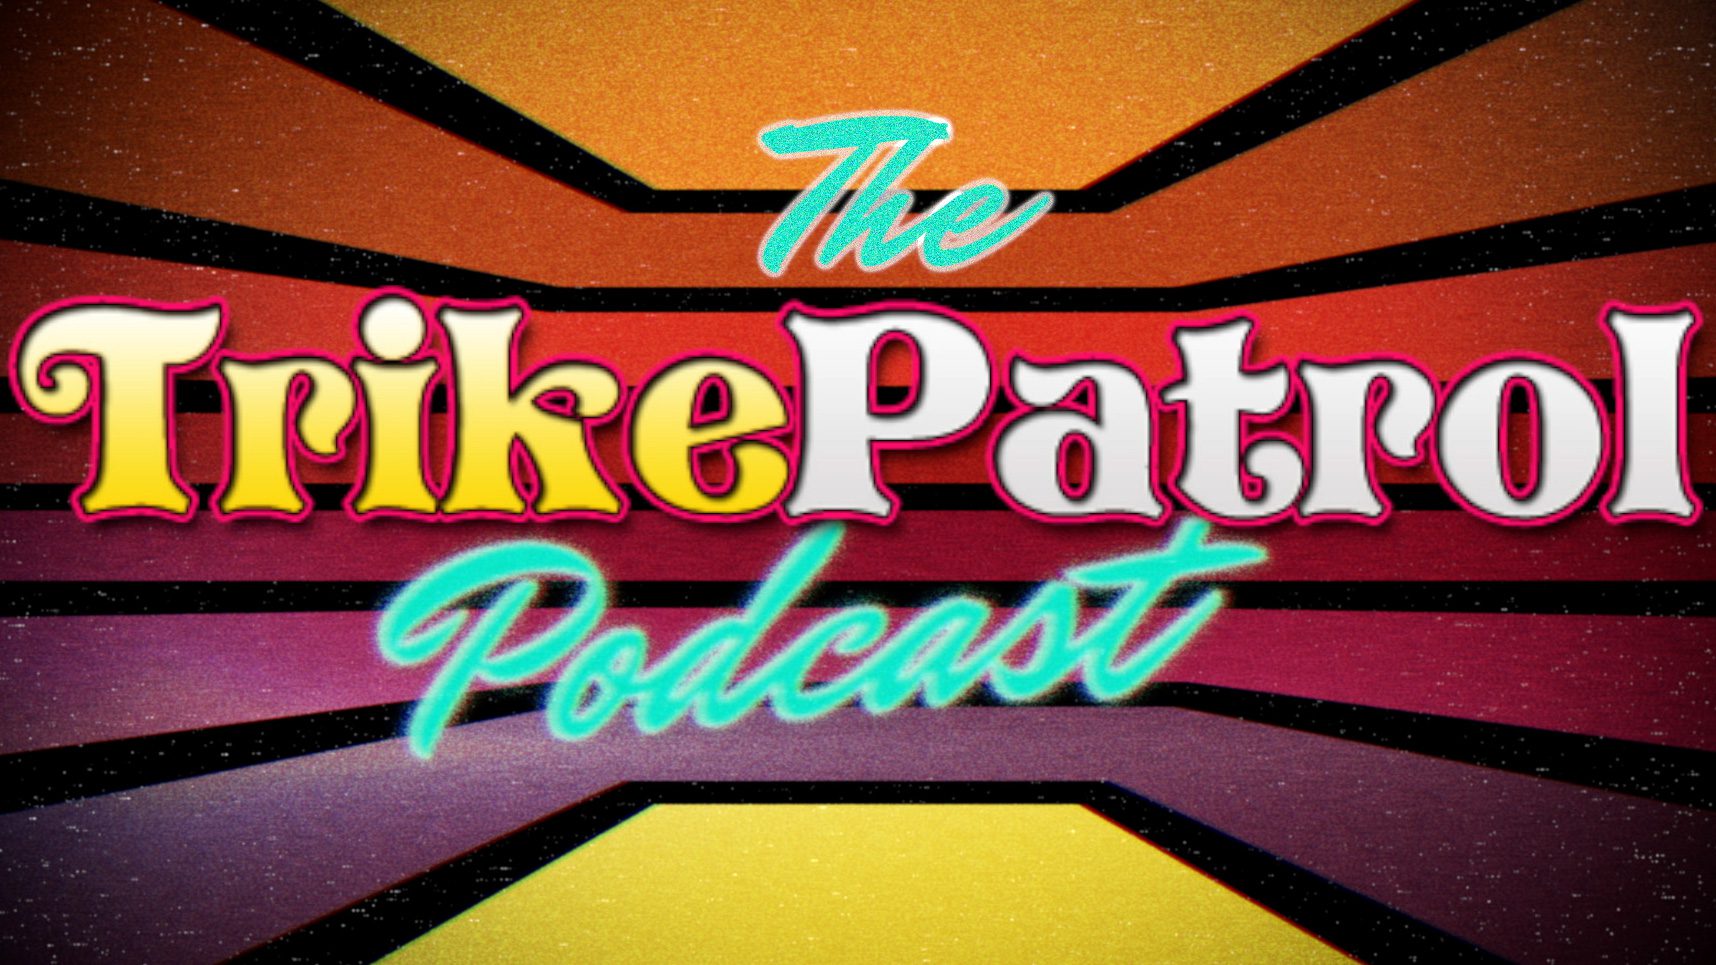 The Official Trikepatrol Podcast — The Free Podcast Directory 